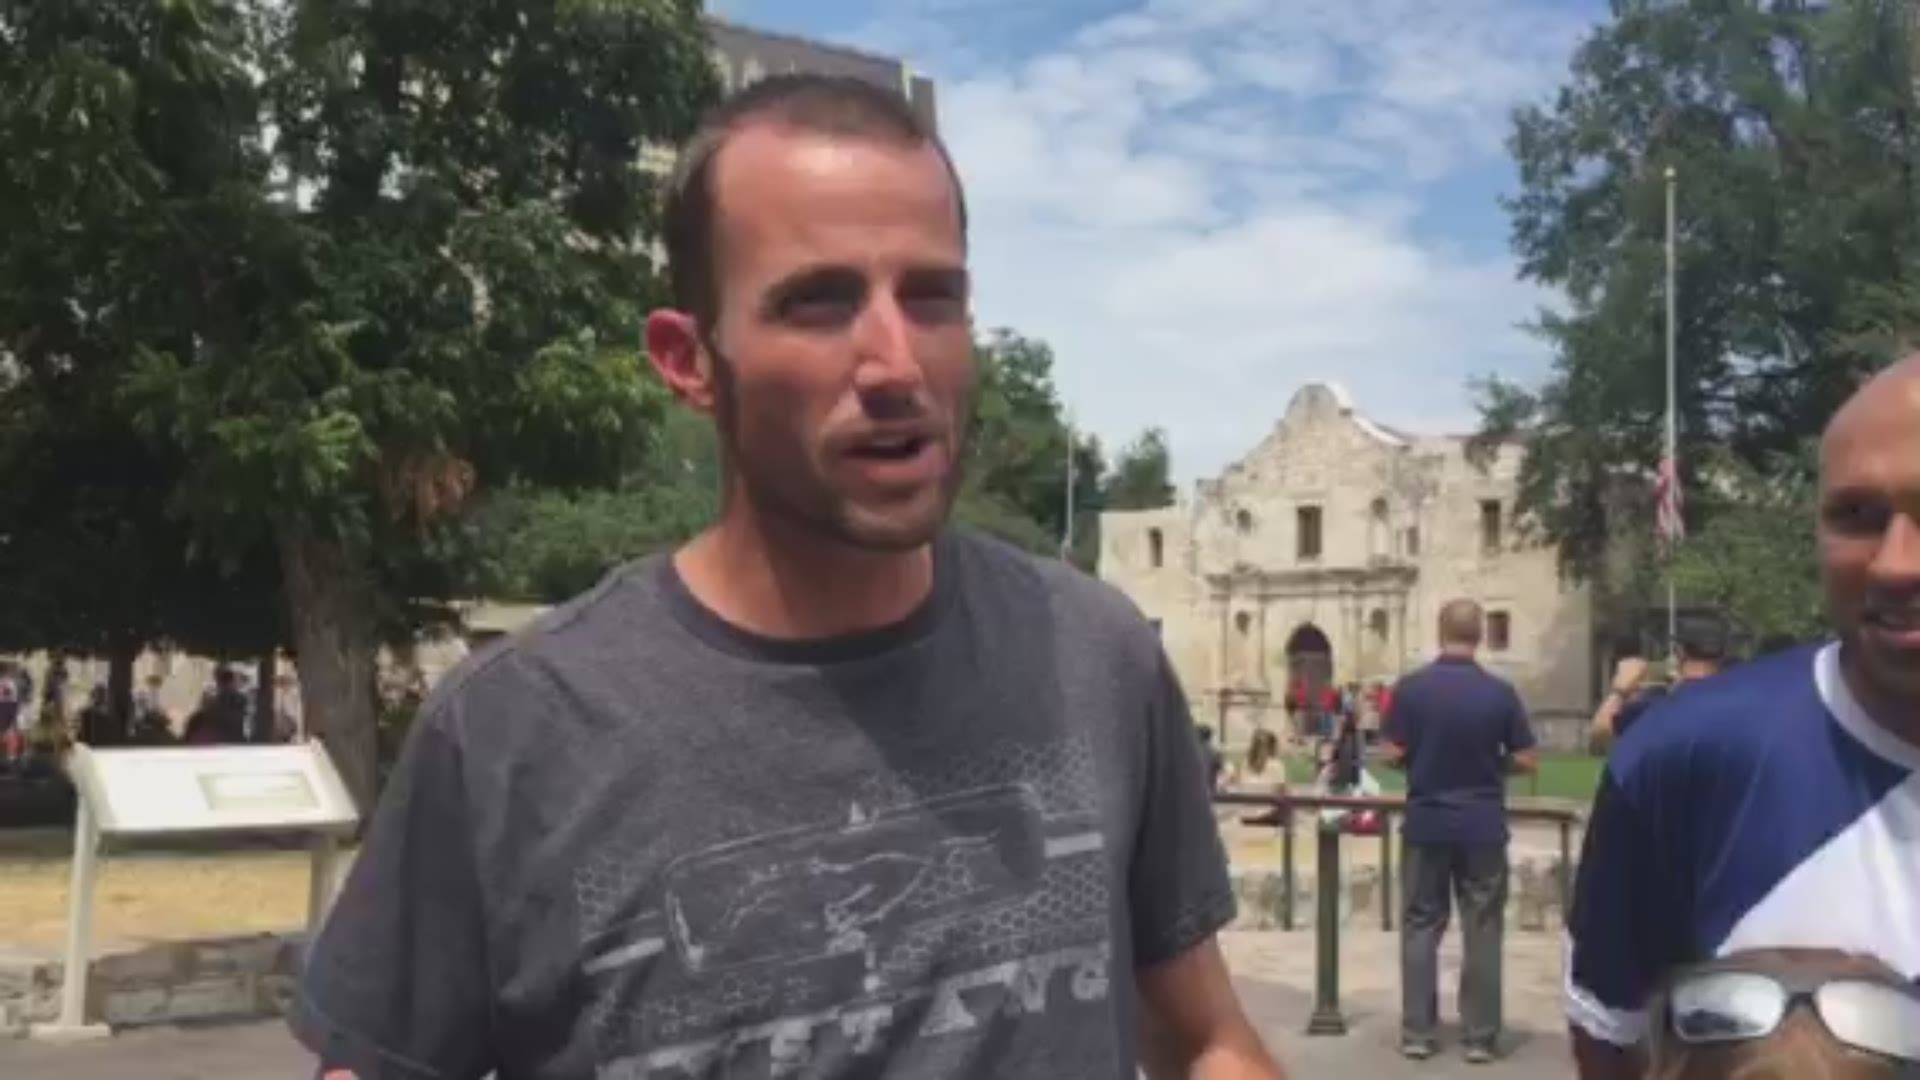 In response to the mass shootings in Dayton and El Paso, Dillon Emery, family and friends offered free hugs in front of the Alamo on Sunday.